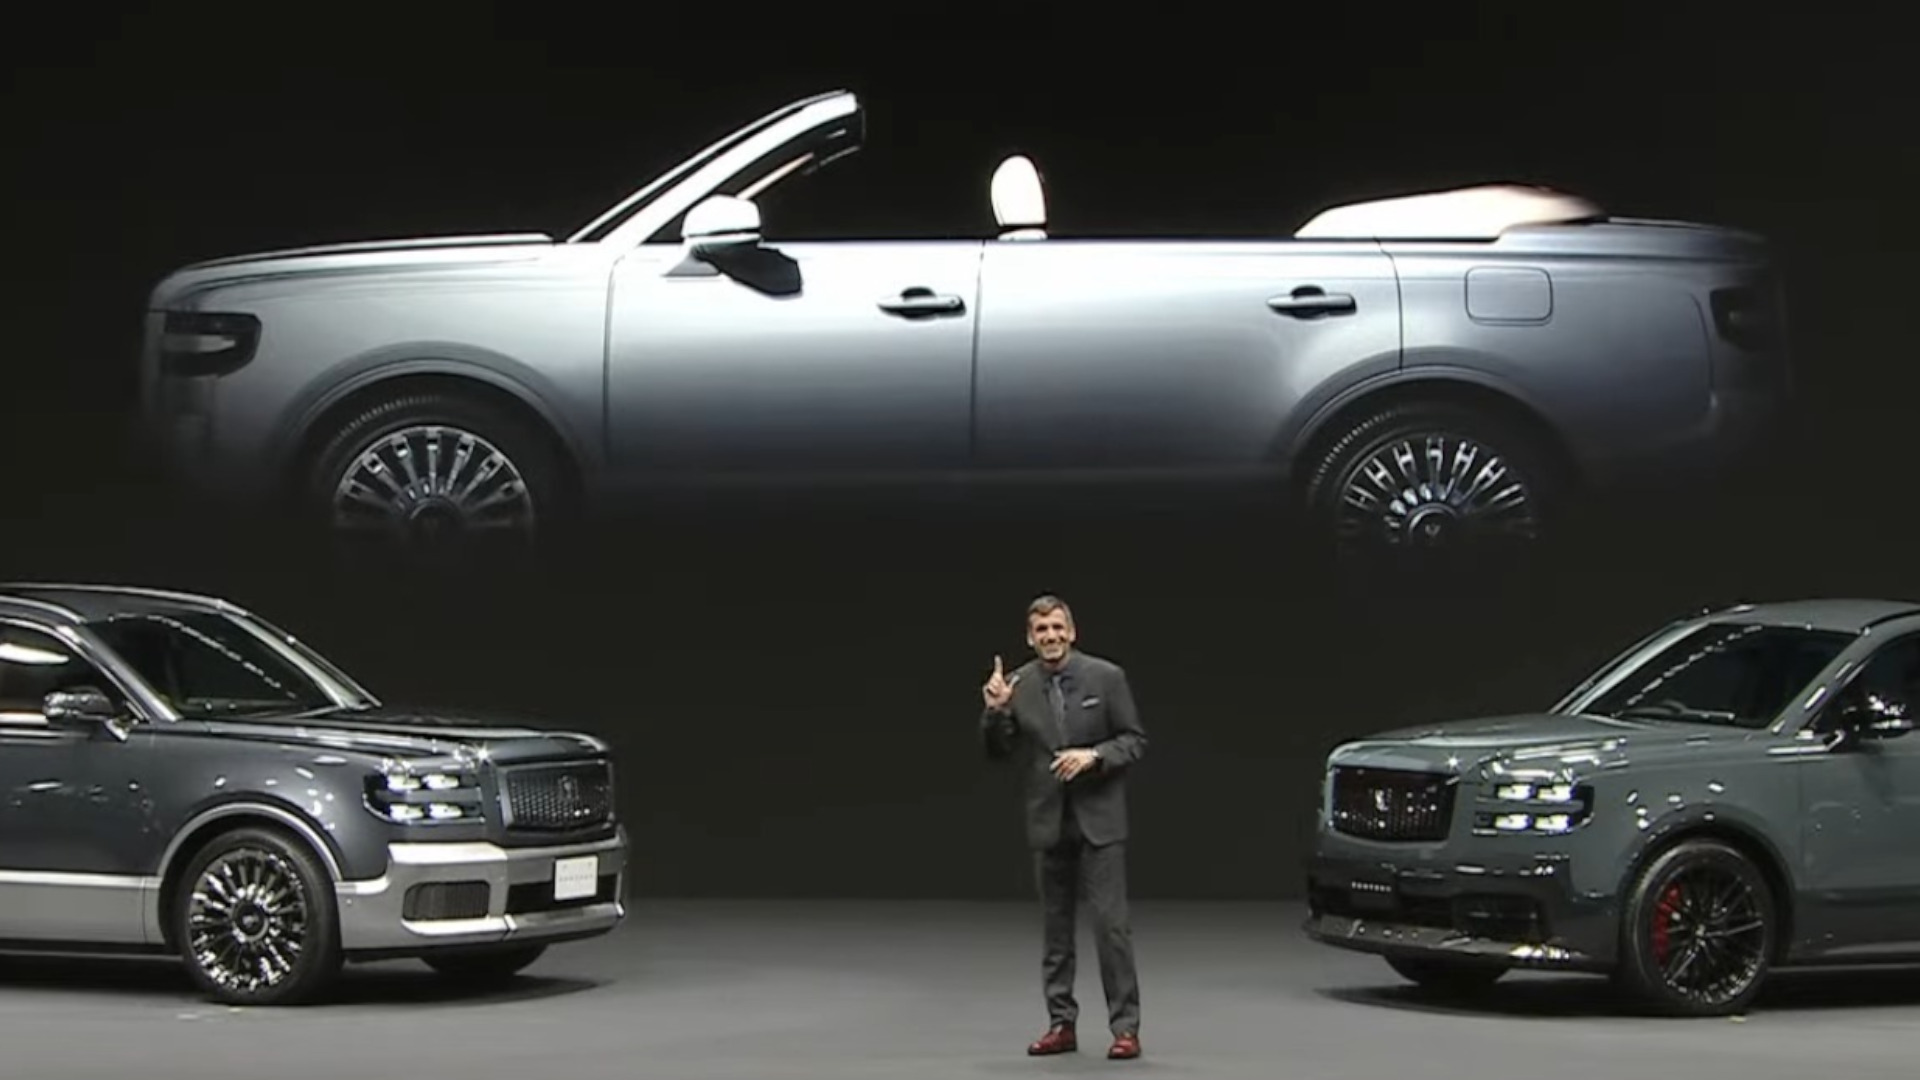 Toyota Teased a Convertible Version of Its Ultra-Lux, $170,000 Century SUV